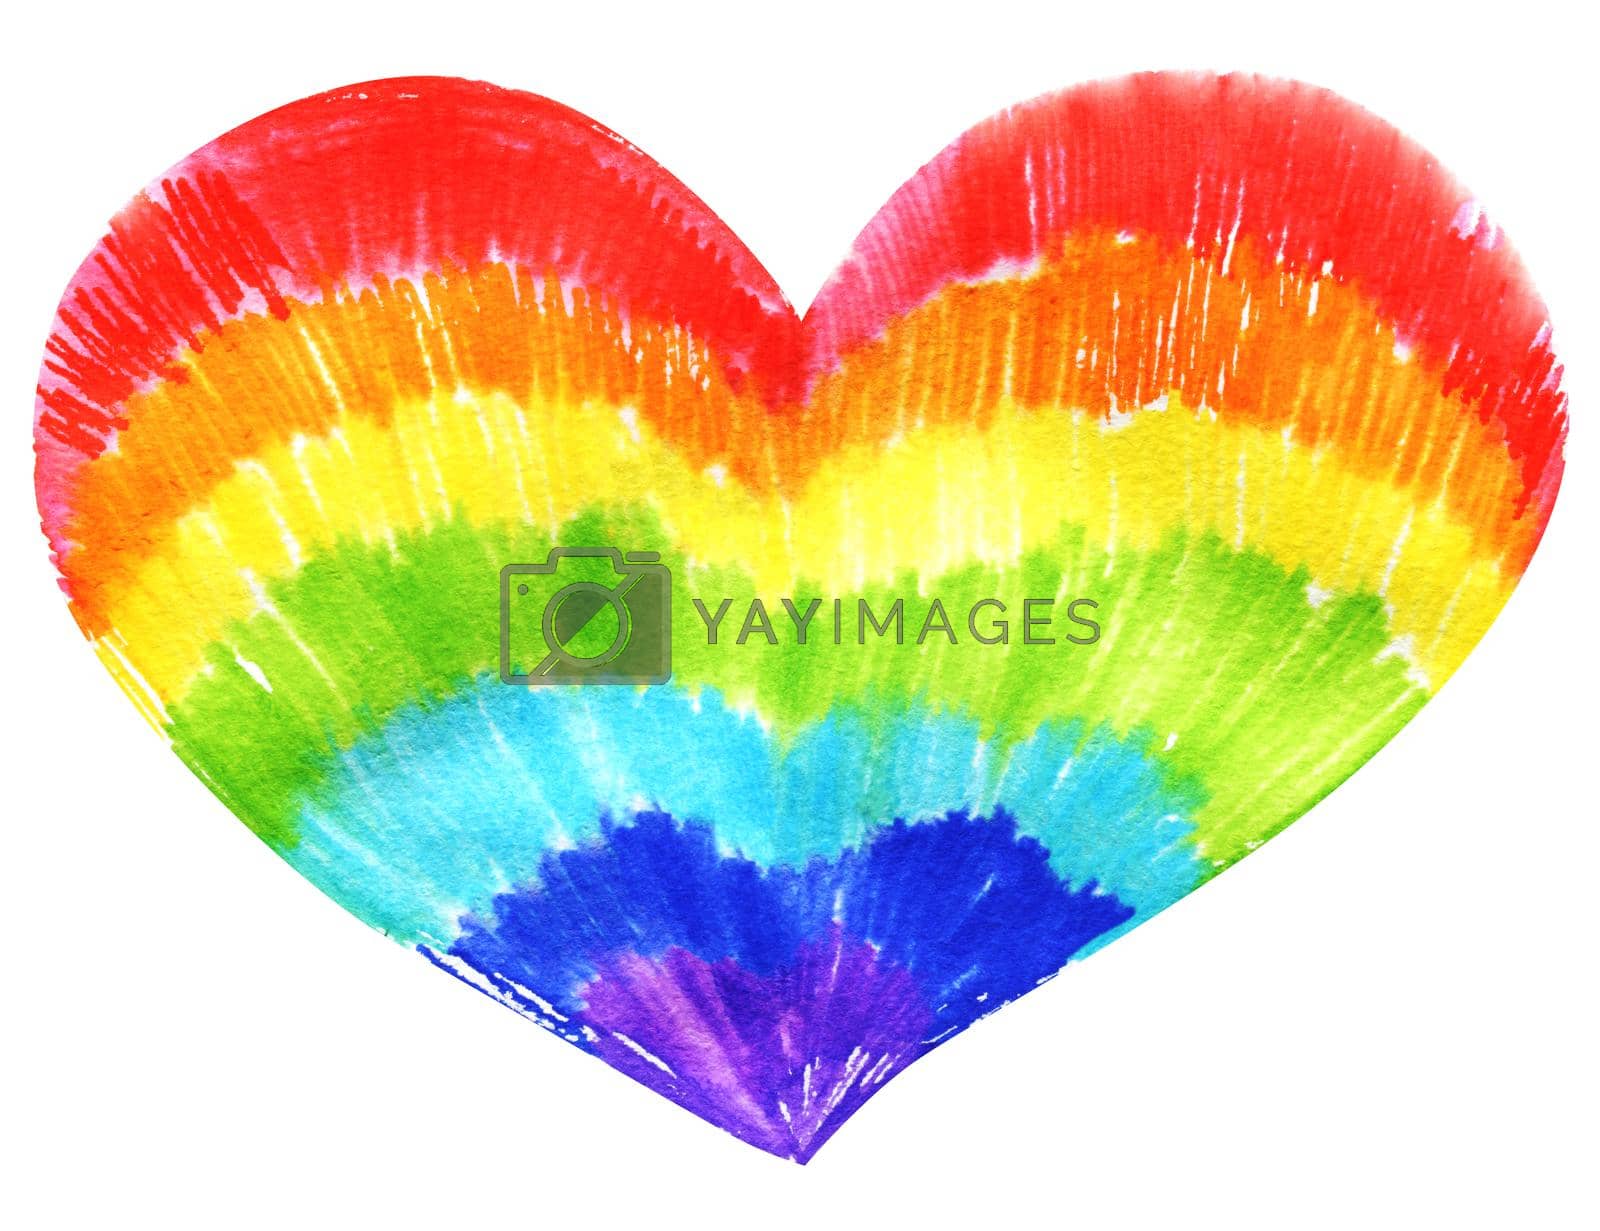 Royalty free image of Rainbow no gender heart by Xeniasnowstorm